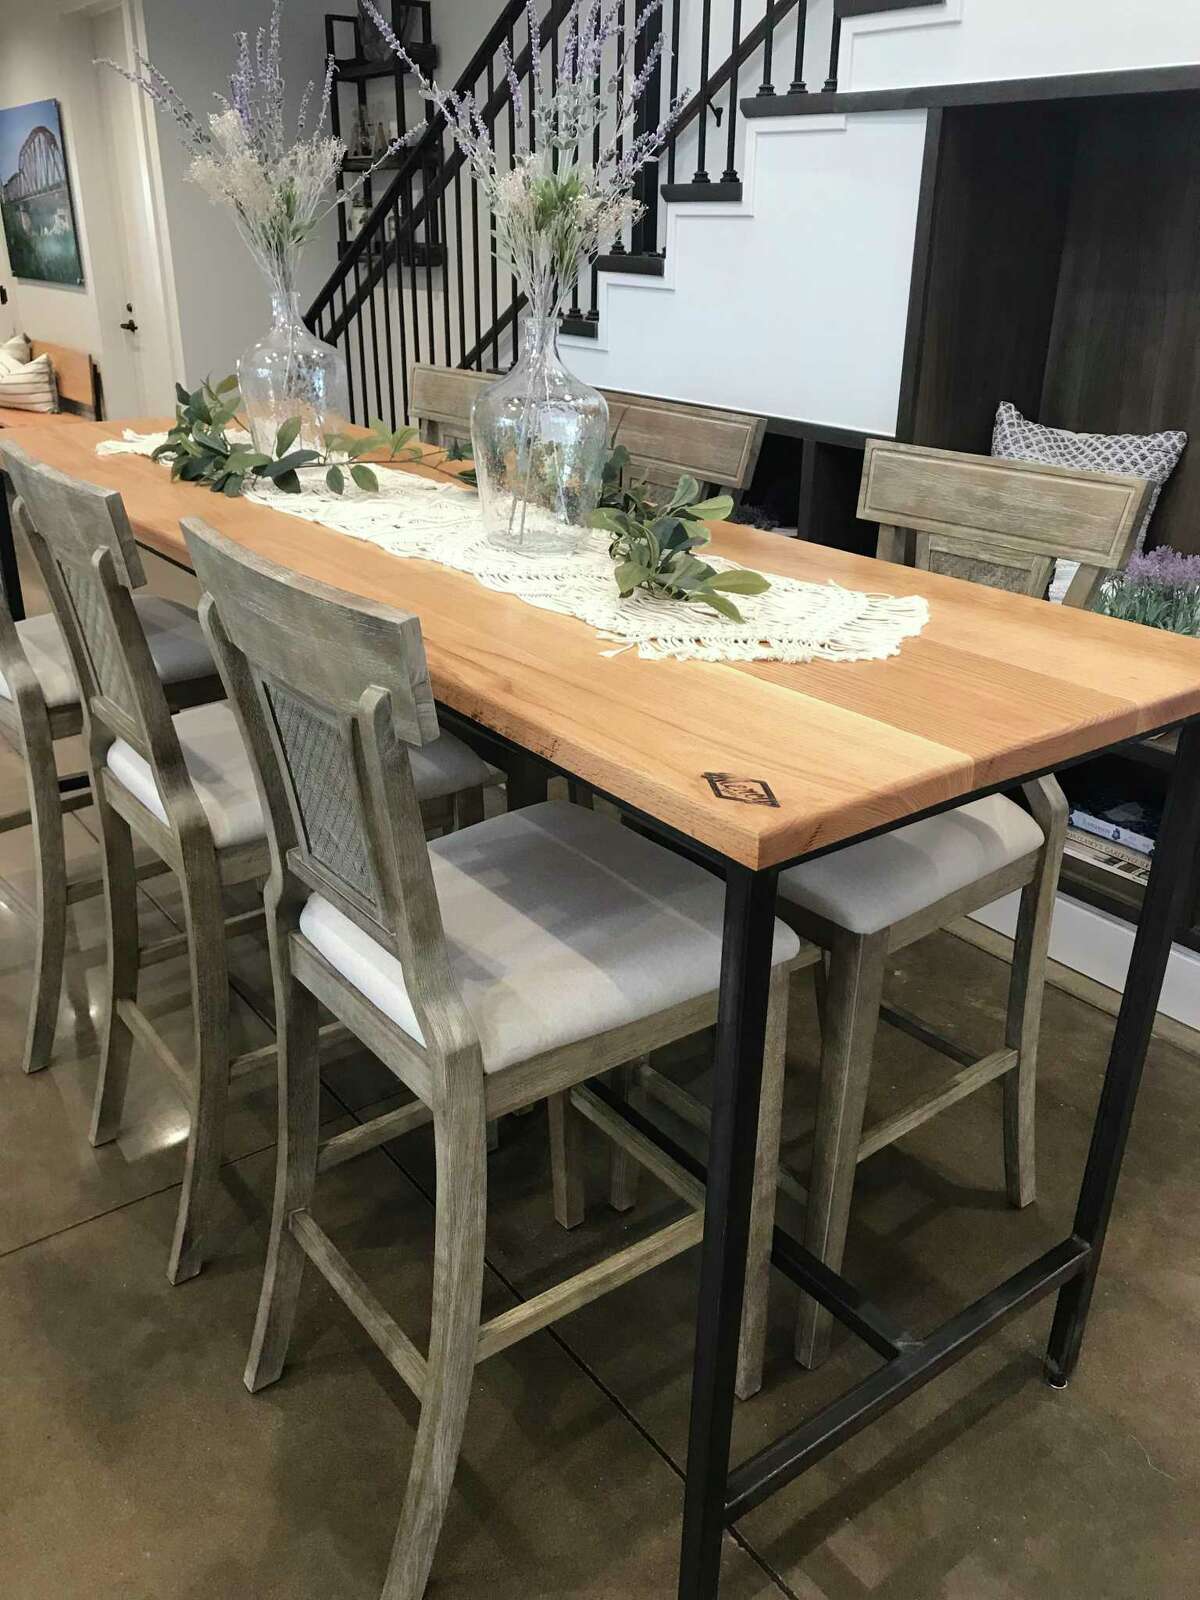 Veranda hired local social enterprise business Mercy Goods Co. to design and build a table and bench for The Cottage House, the community’s newly opened amenity center.